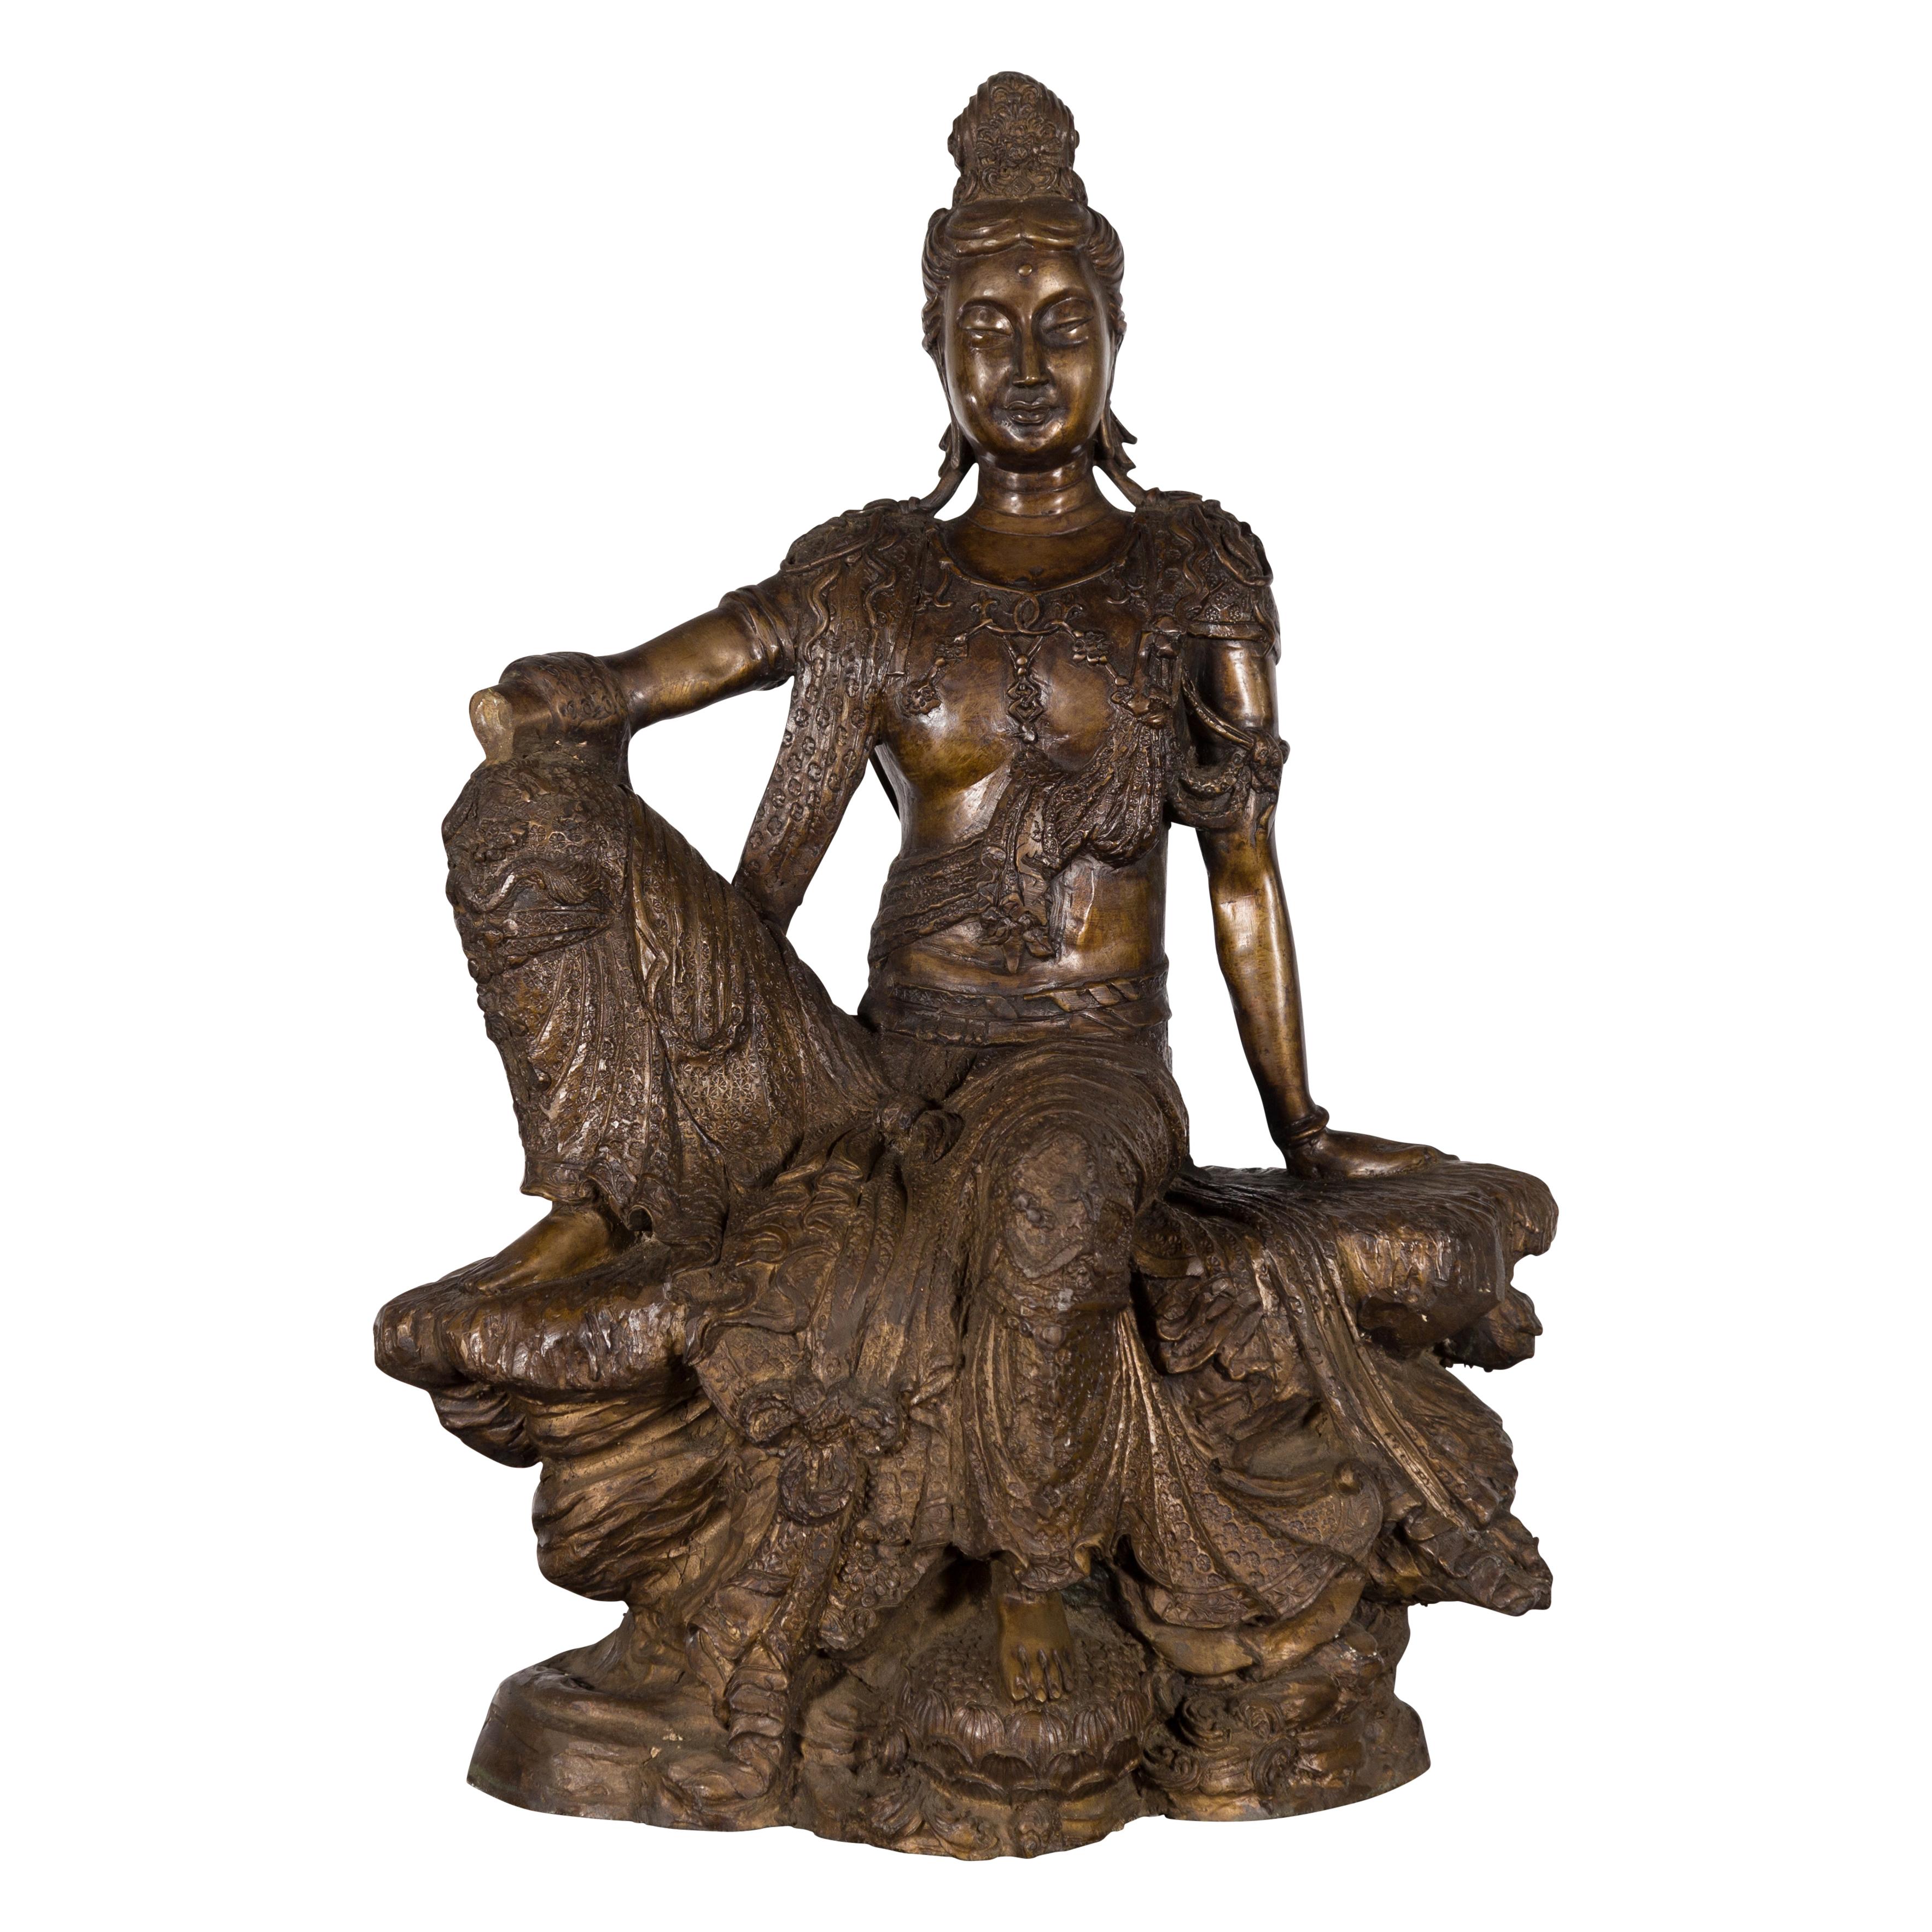 A vintage bronze statuette from the mid-20th century depicting Quan Yin. Created during the midcentury period, this bronze statuette features the Quan Yin, the Goddess of Compassion, depicted in a seated position. Wearing ornate clothes and